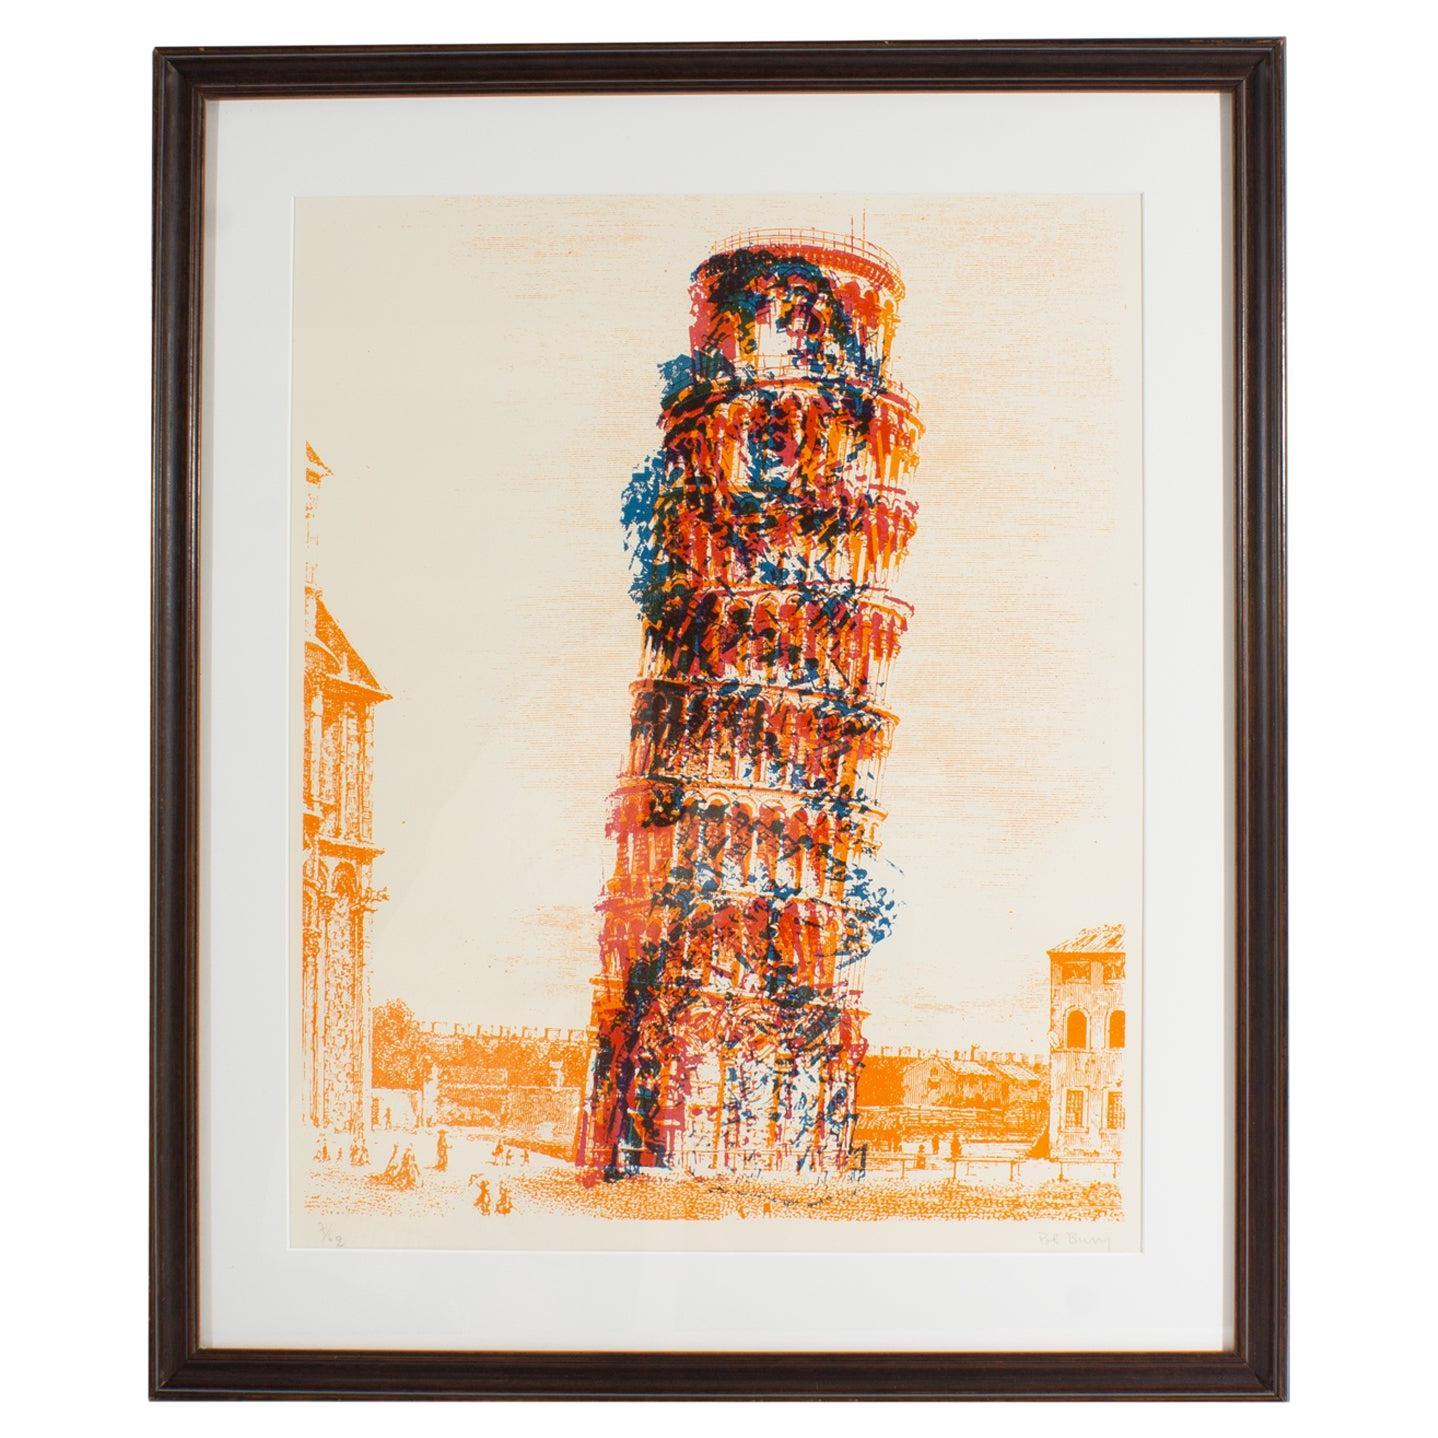 Pol Bury Signed 1966 “Cinetization X” Serigraph of the Leaning Tower of Pisa